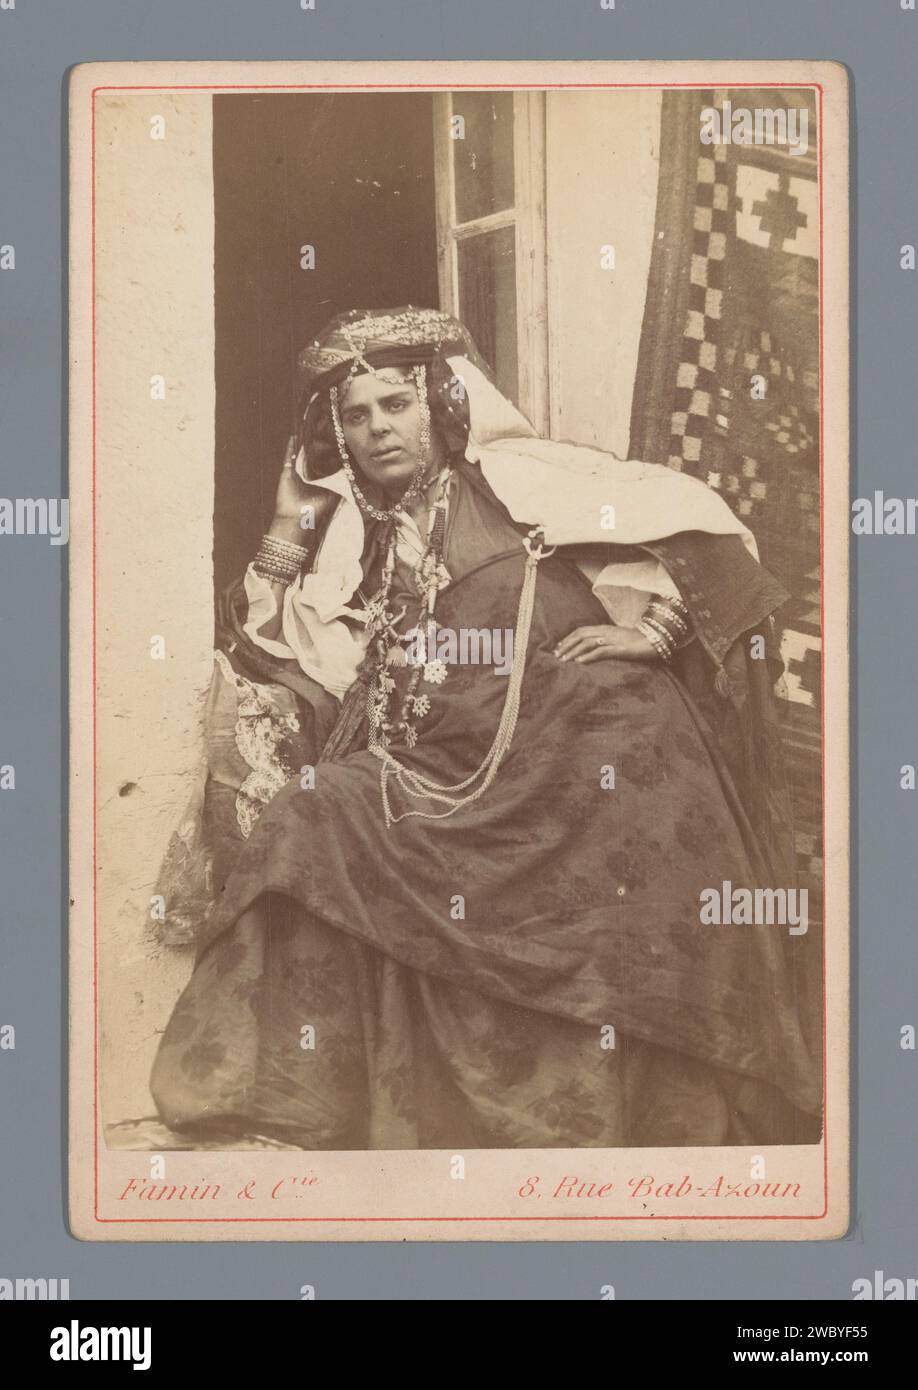 Portrait of an unknown woman in traditional clothing, Famin et Cie., 1863 - 1889 cabinet photograph  Algeria cardboard. photographic support albumen print adult woman. folk costume, regional costume Algeria Stock Photo